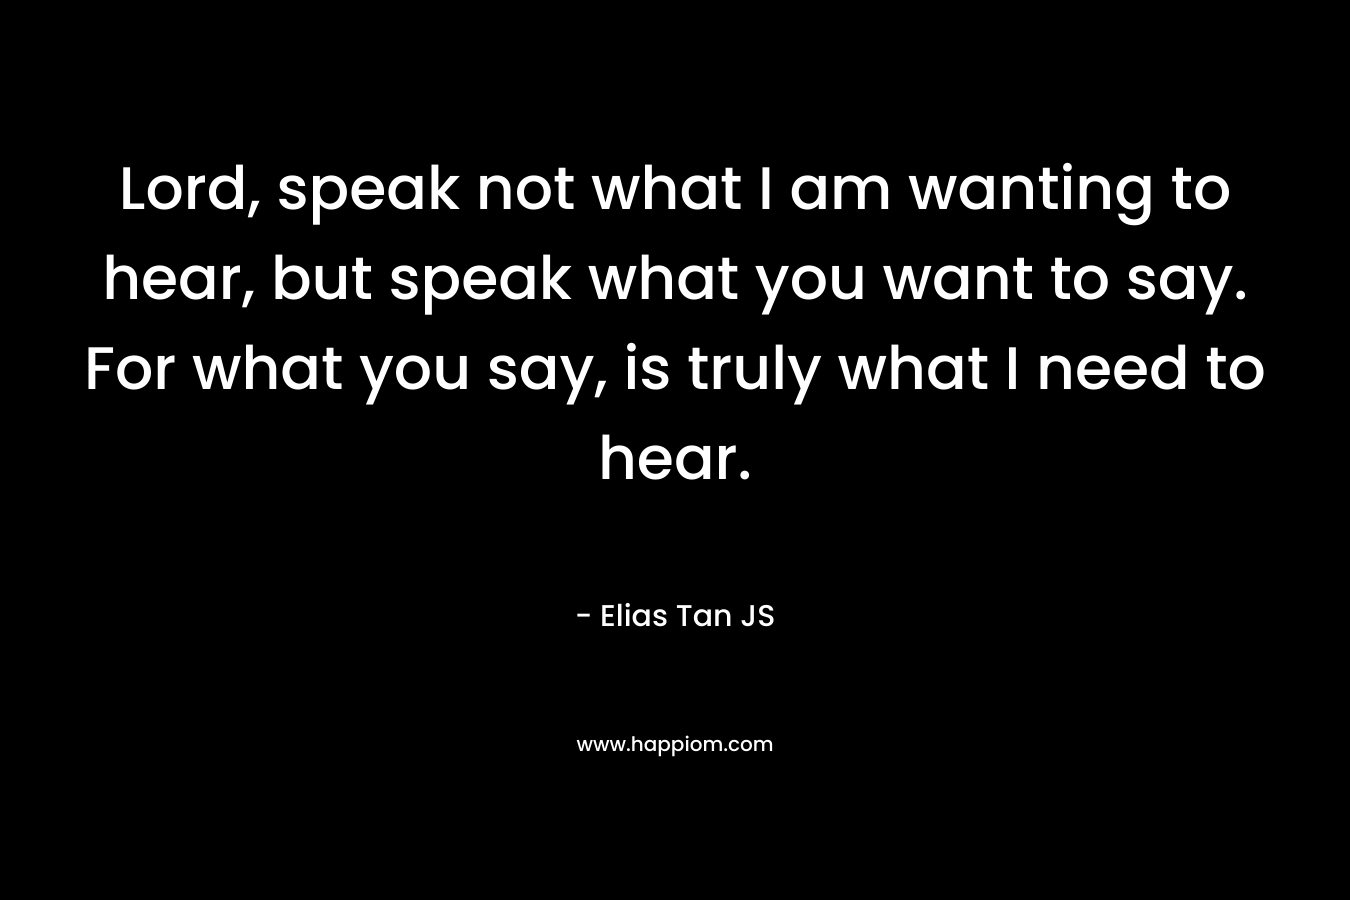 Lord, speak not what I am wanting to hear, but speak what you want to say. For what you say, is truly what I need to hear.